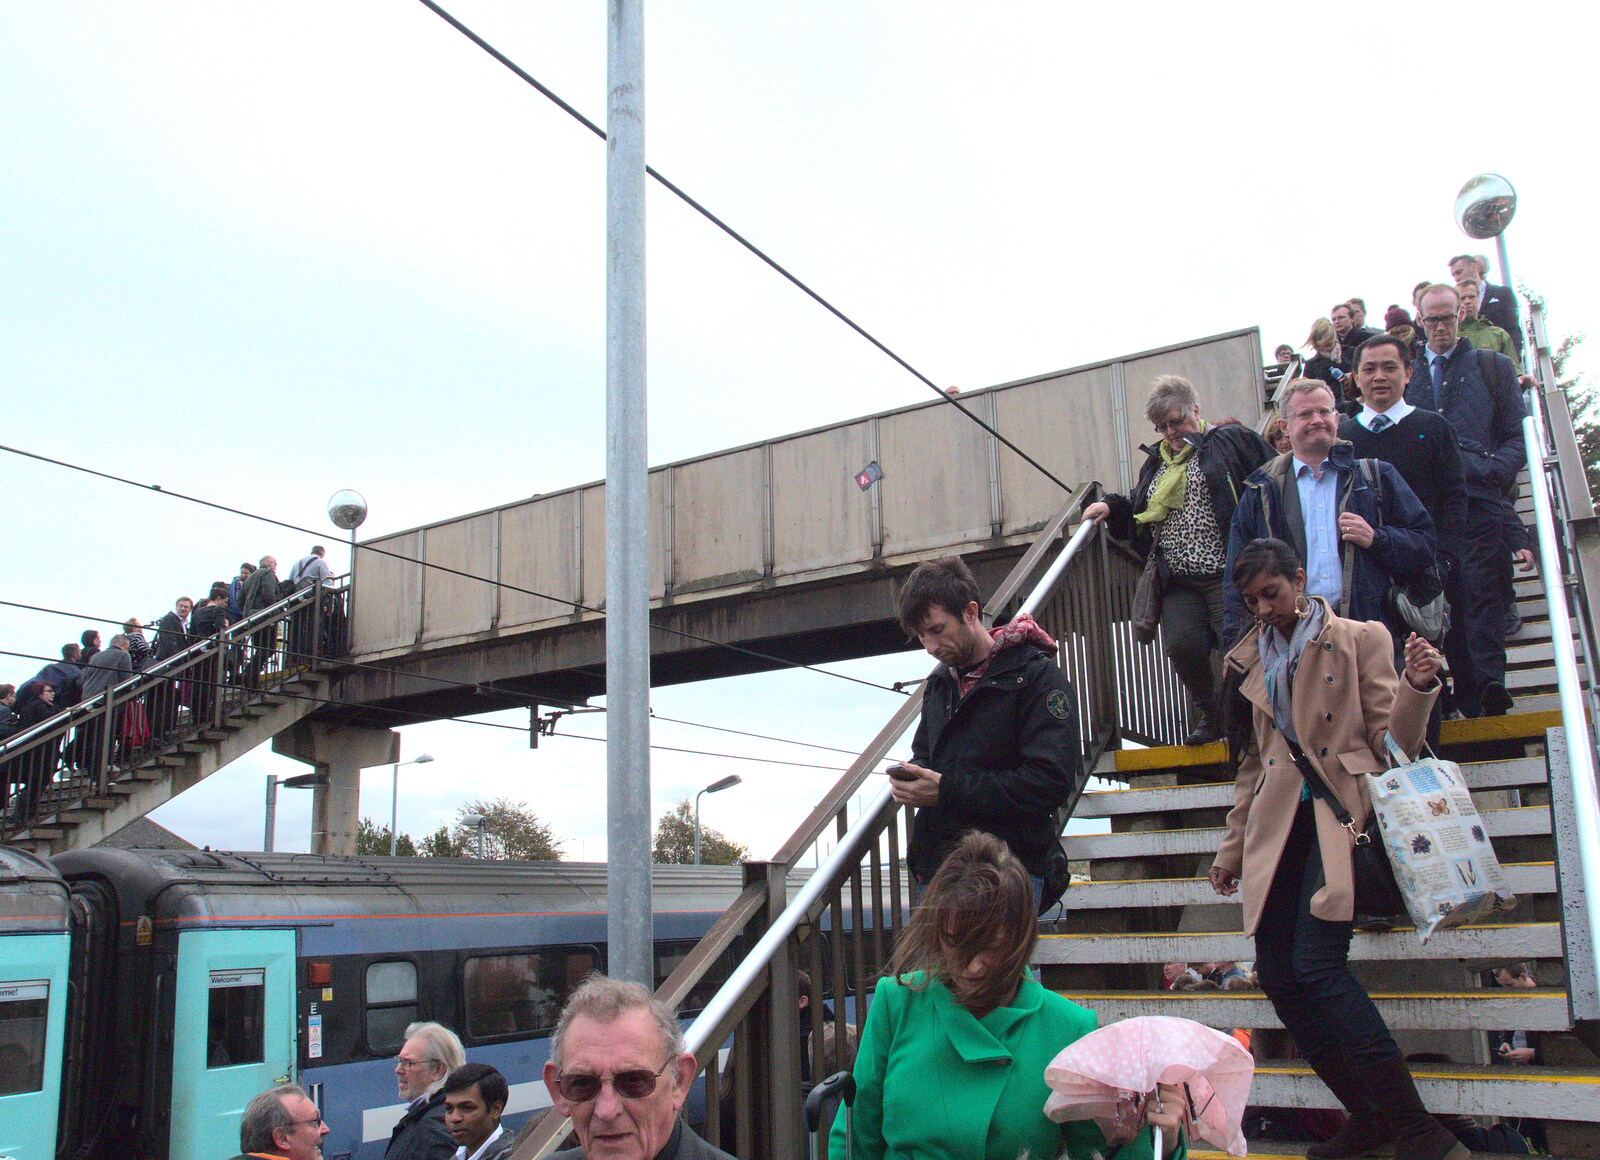 A stream of people cross the bridge from (Very) Long Train (Not) Running, Stowmarket, Suffolk - 21st October 2014